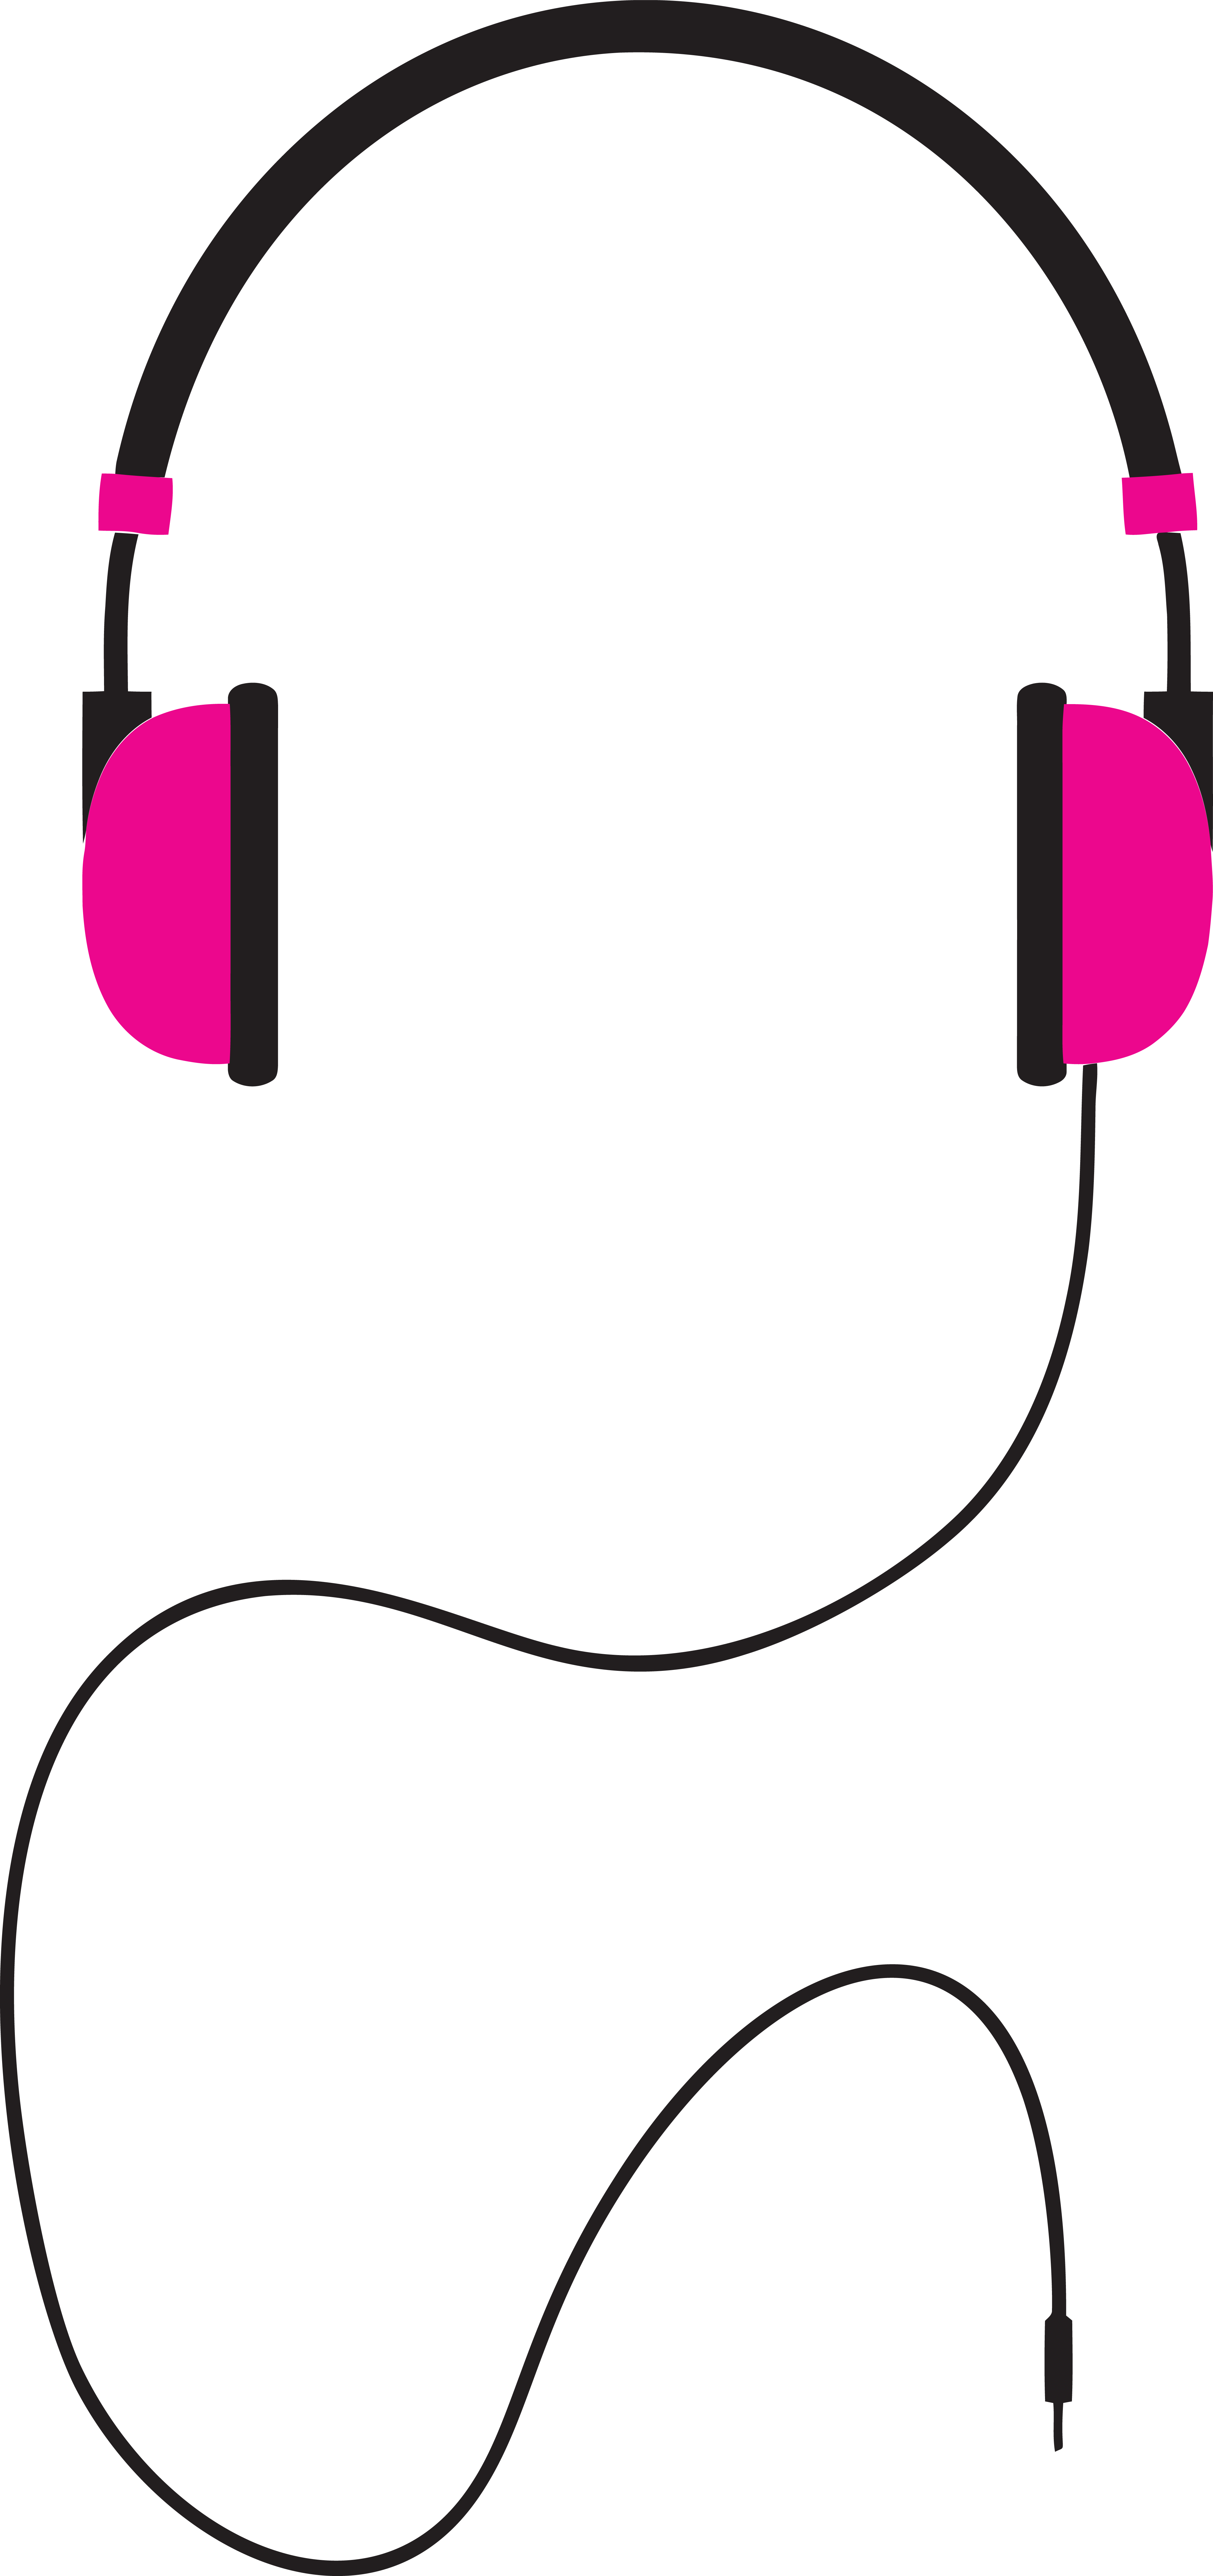 Headphones Clipart | Free download on ClipArtMag